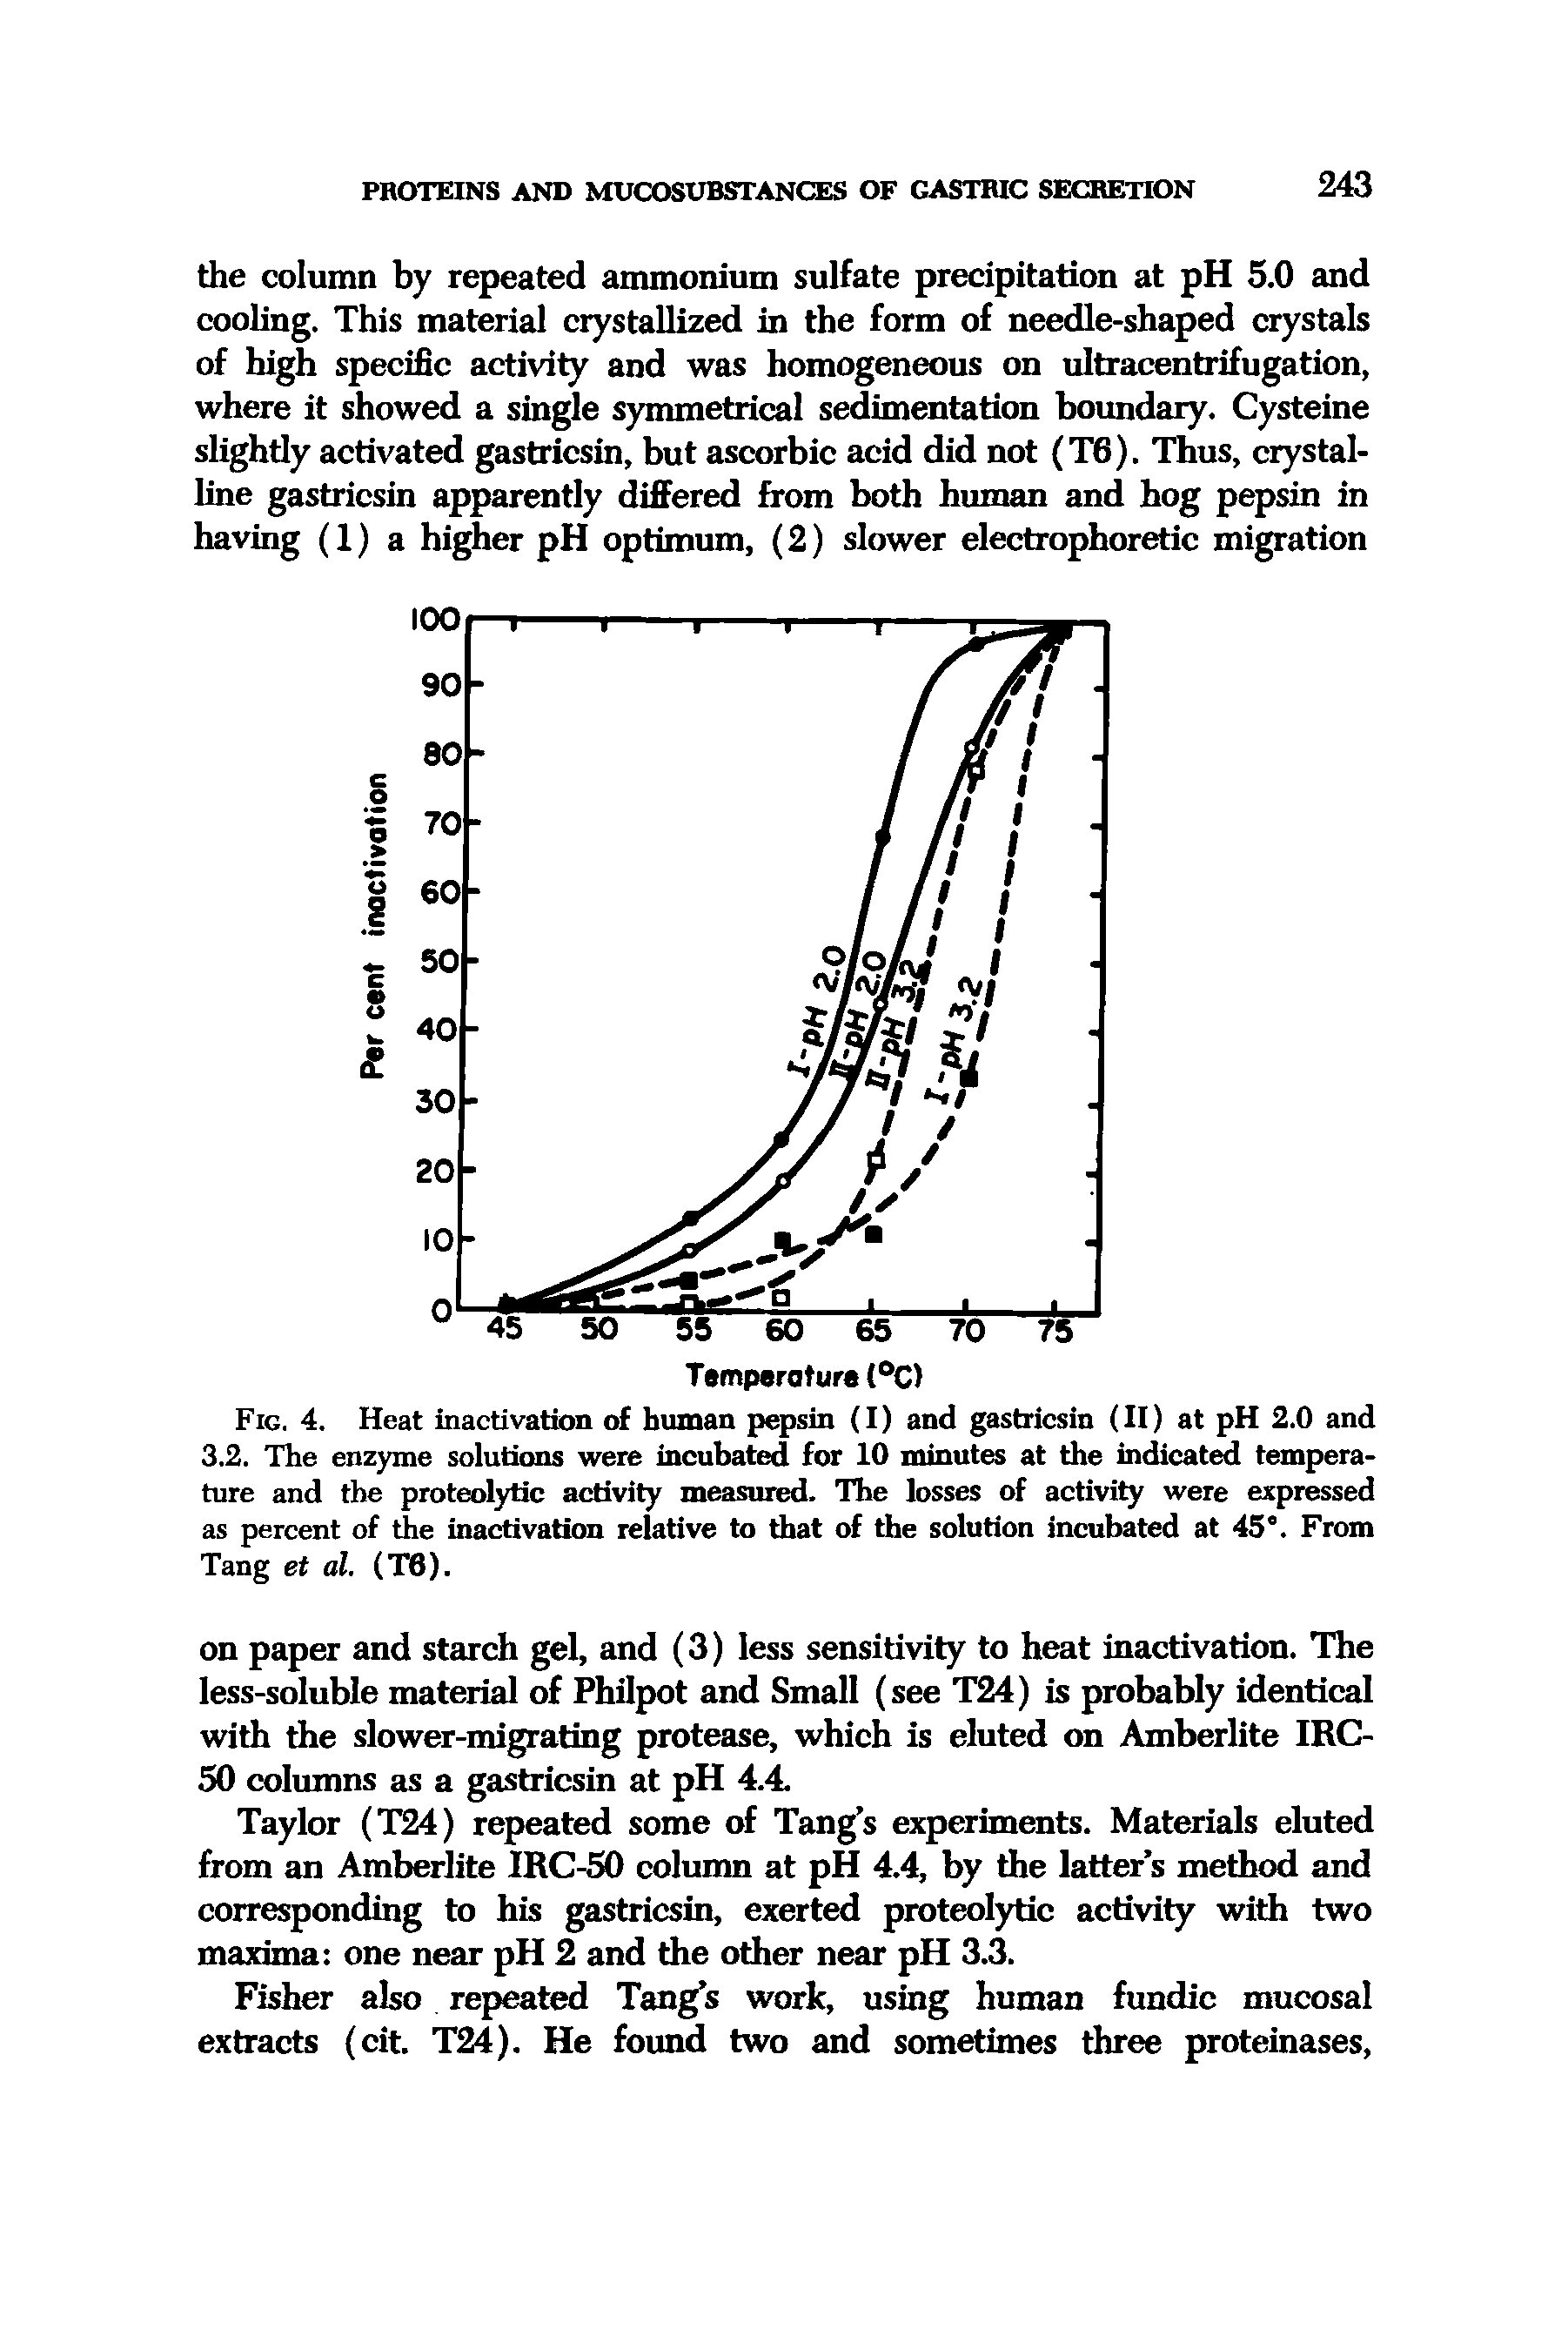 Fig. 4. Heat inactivation of human pepsin (I) and gastricsin (II) at pH 2.0 and 3.2. The enzyme solutions were incubated for 10 minutes at the indicated temperature and the proteolytic activity measiued. The losses of activity were expressed as percent of the inactivation relative to that of the solution incubated at 45°. From Tang et al. (T6).